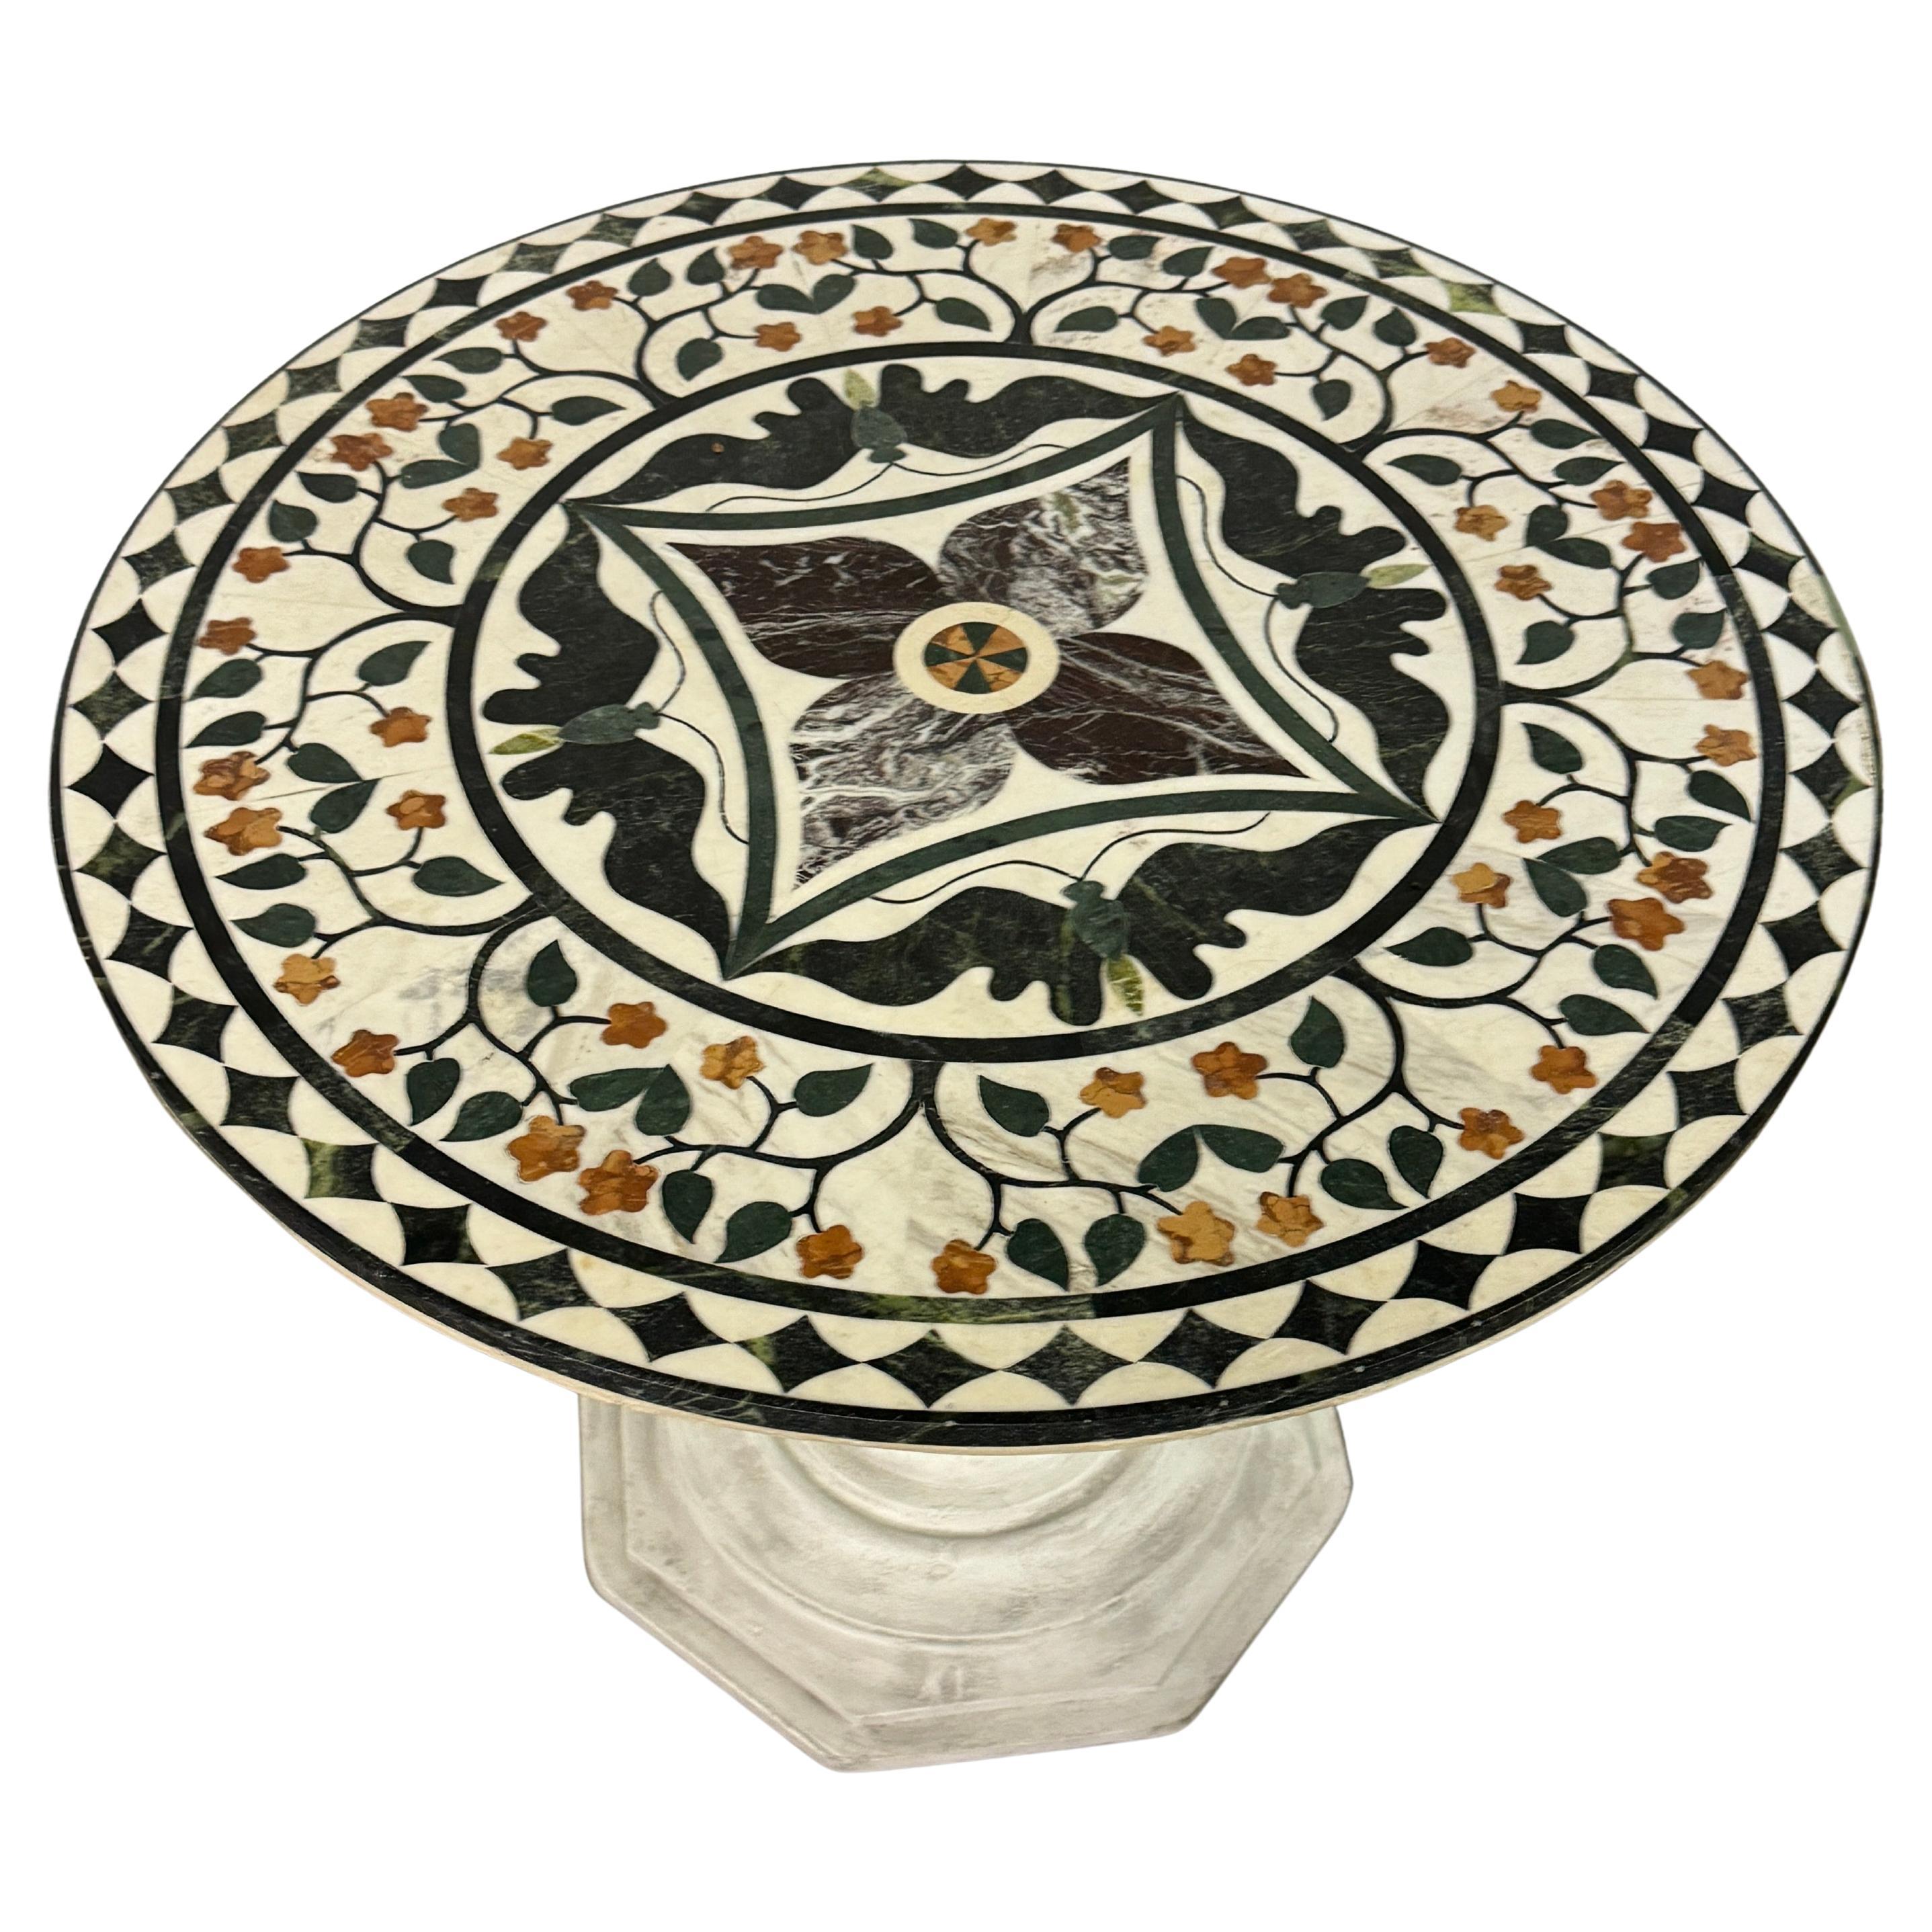 Baroque Italian Pietra Dura Inlaid Marble Center Hall Table  For Sale